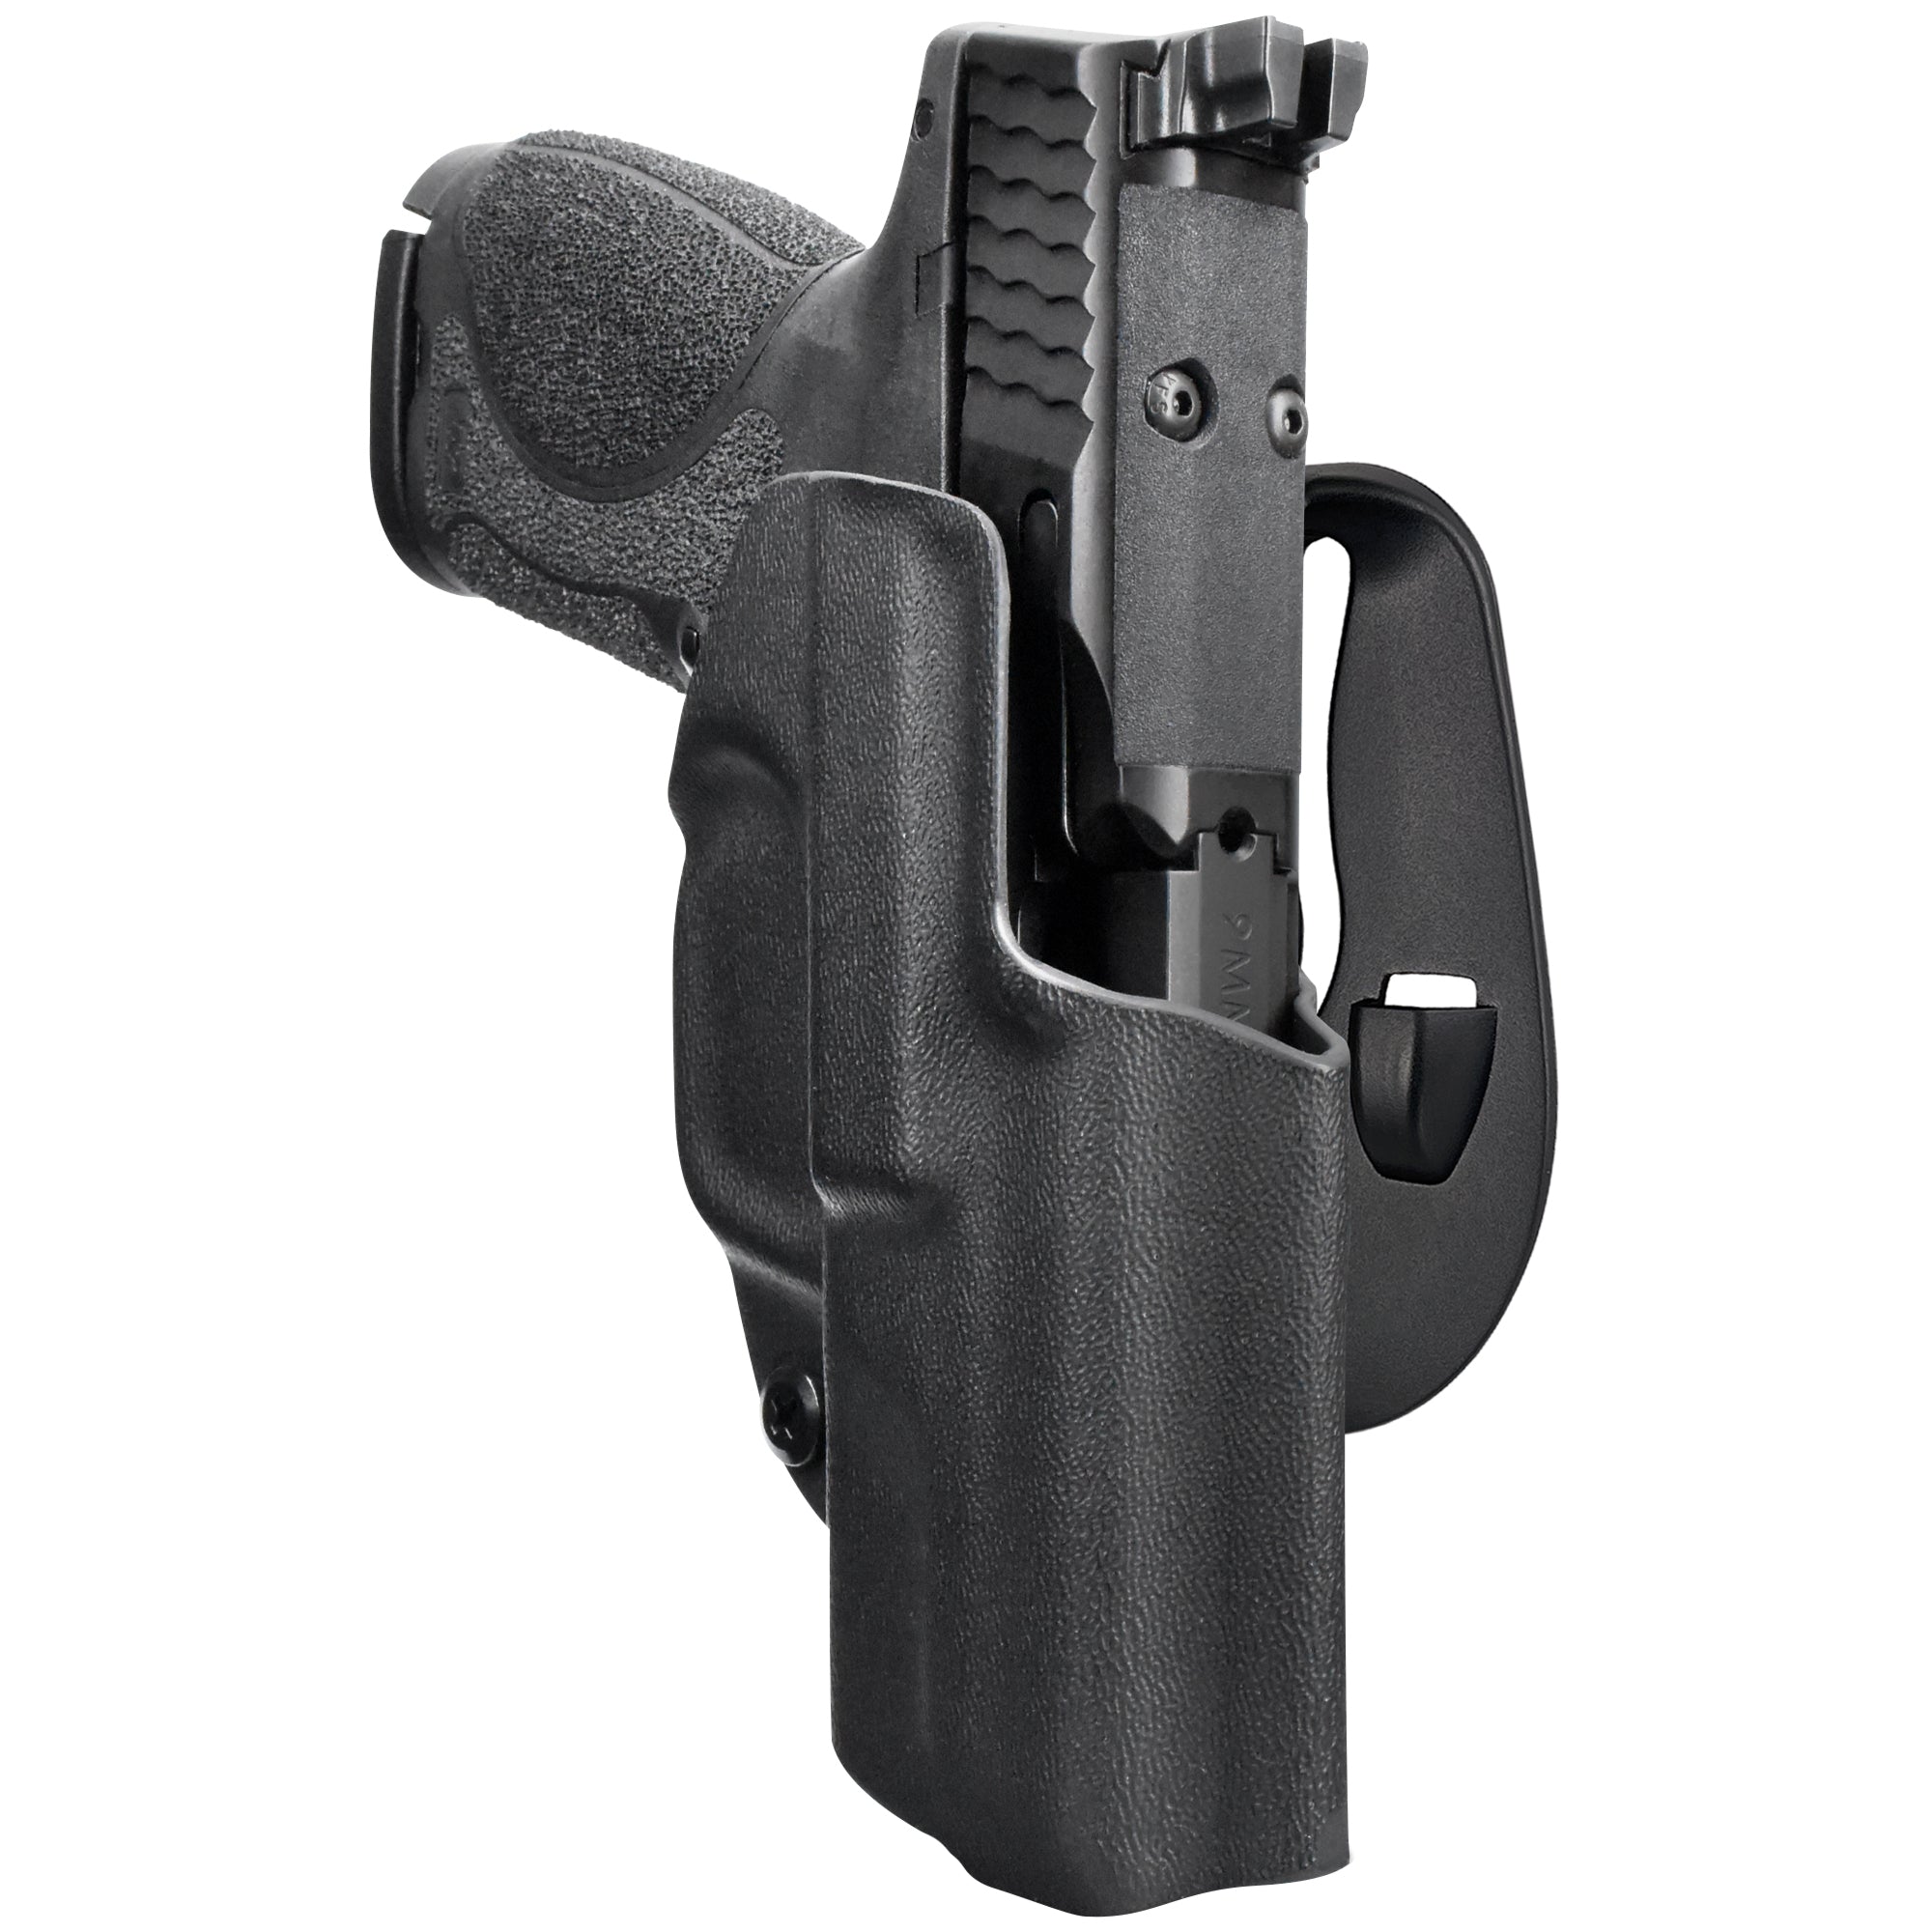 Smith & Wesson M&P9 Subcompact 3.6'' OWB Paddle Holster in Black